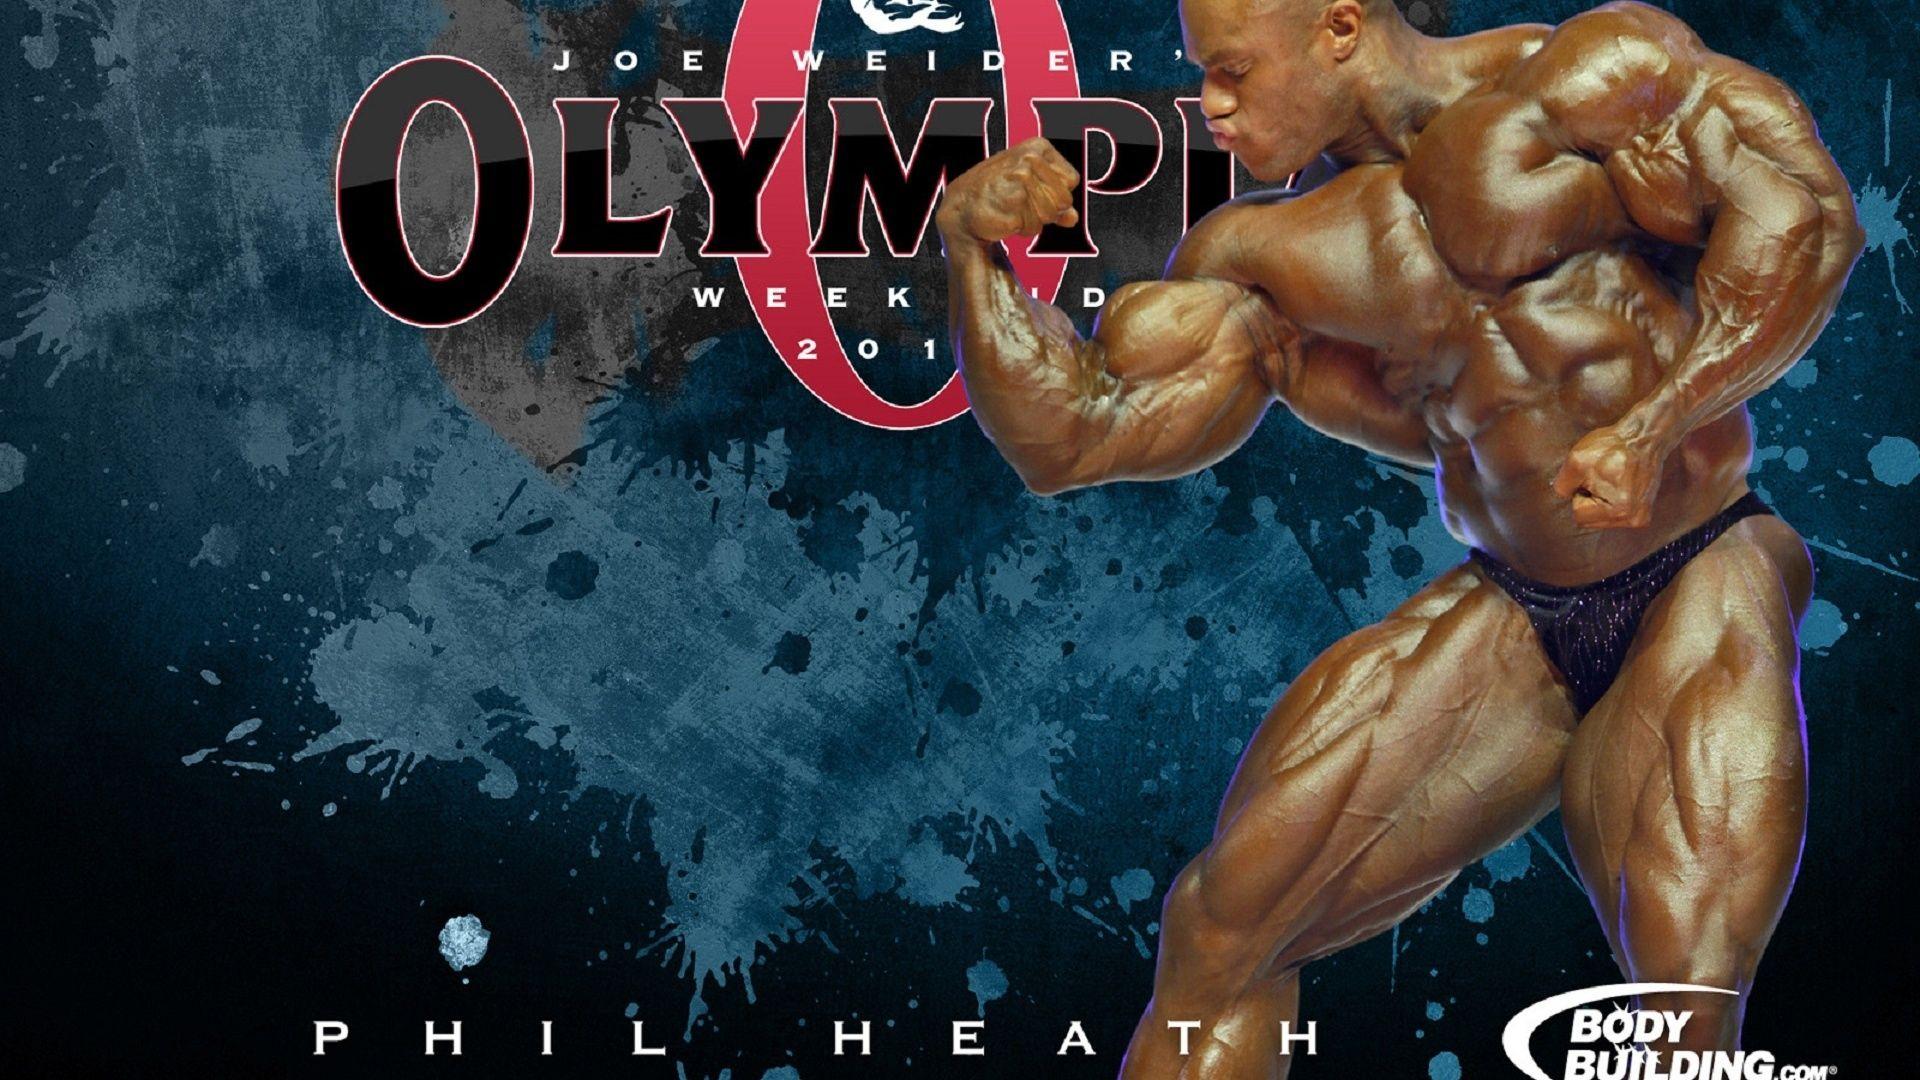 Mr Olympia hd photos Desktop Backgrounds Olympia wallpapers